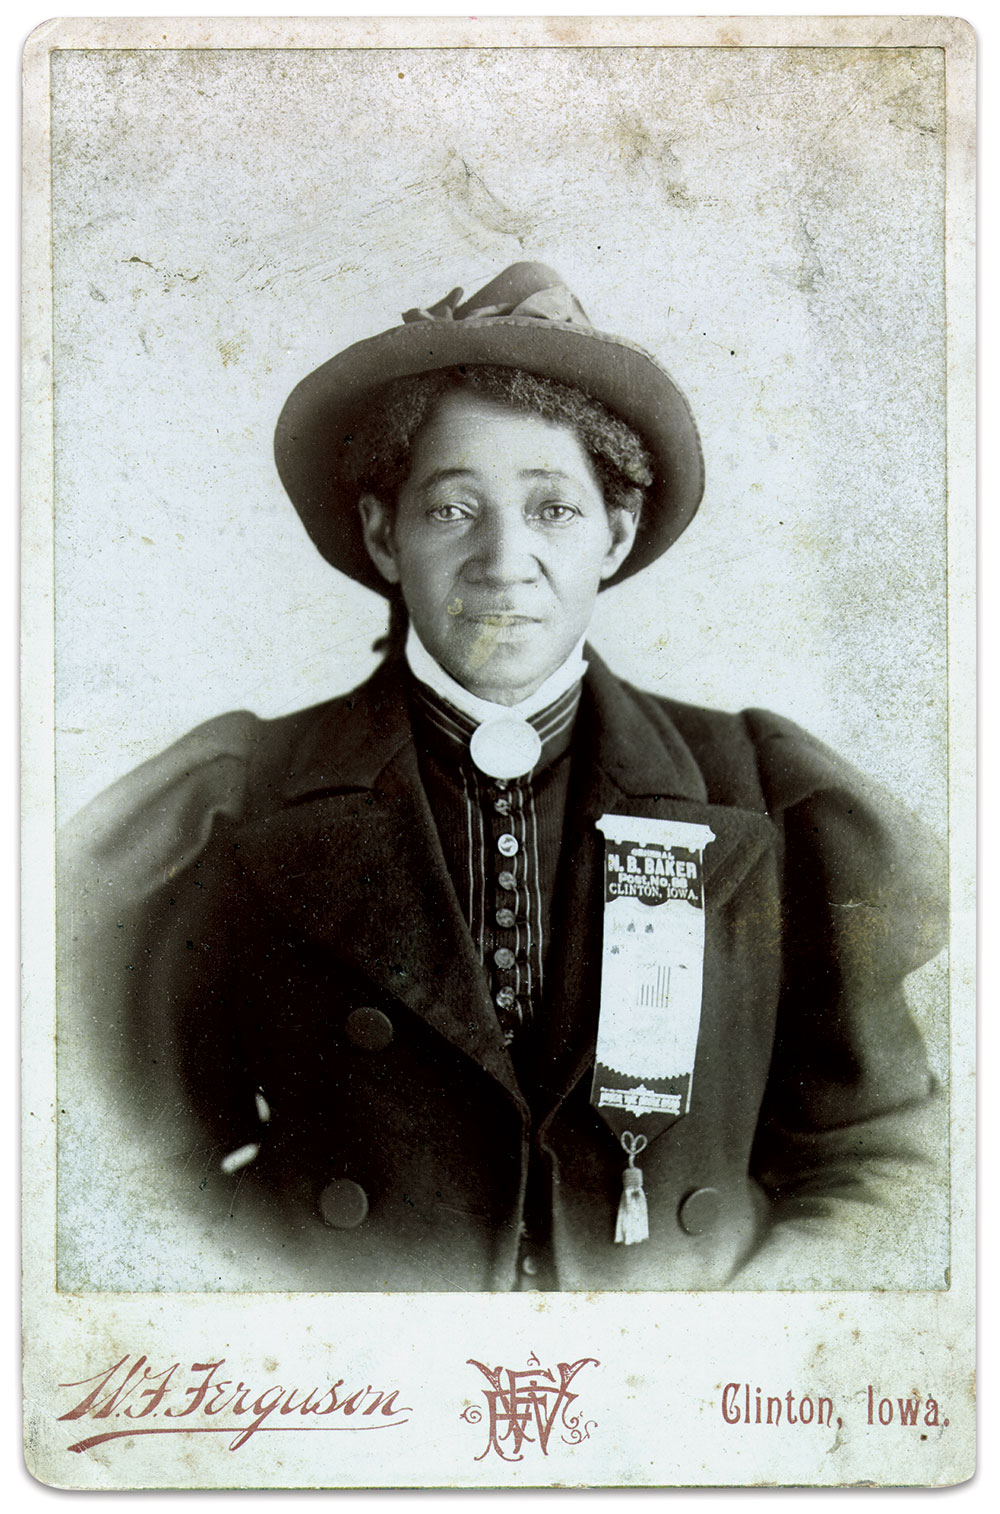 Elizabeth Fairfax wore a silk badge for the General N.B. Baker Post of the Grand Army of the Republic organized in Clinton, Iowa, for her cabinet card photograph by William Frazer Ferguson, a native of Scotland. Author’s collection.